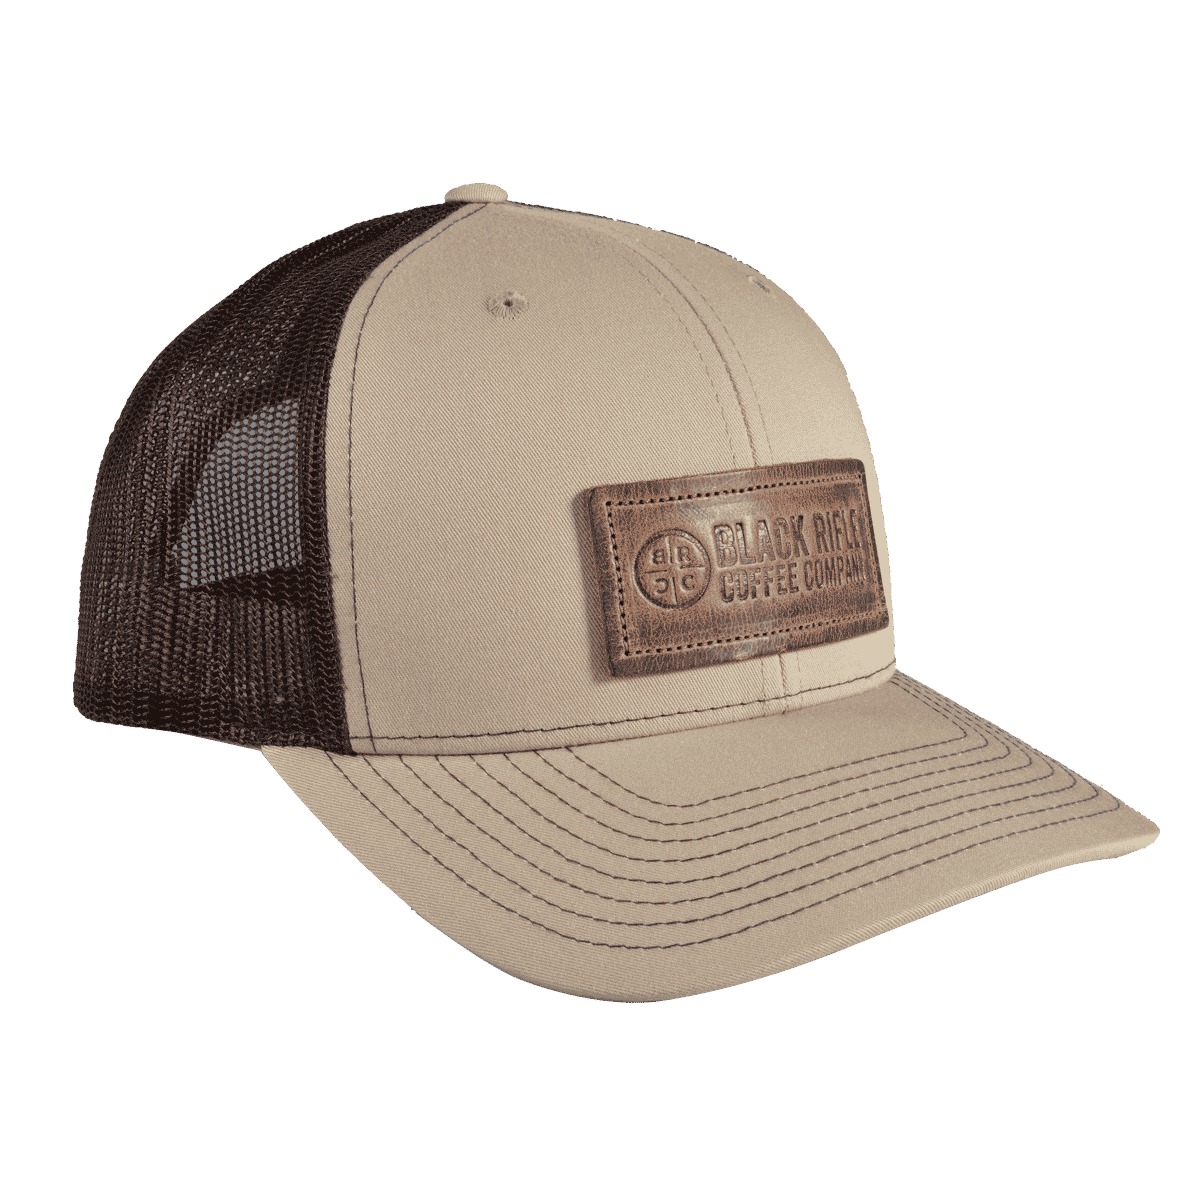 Why do trucker hats have mesh?